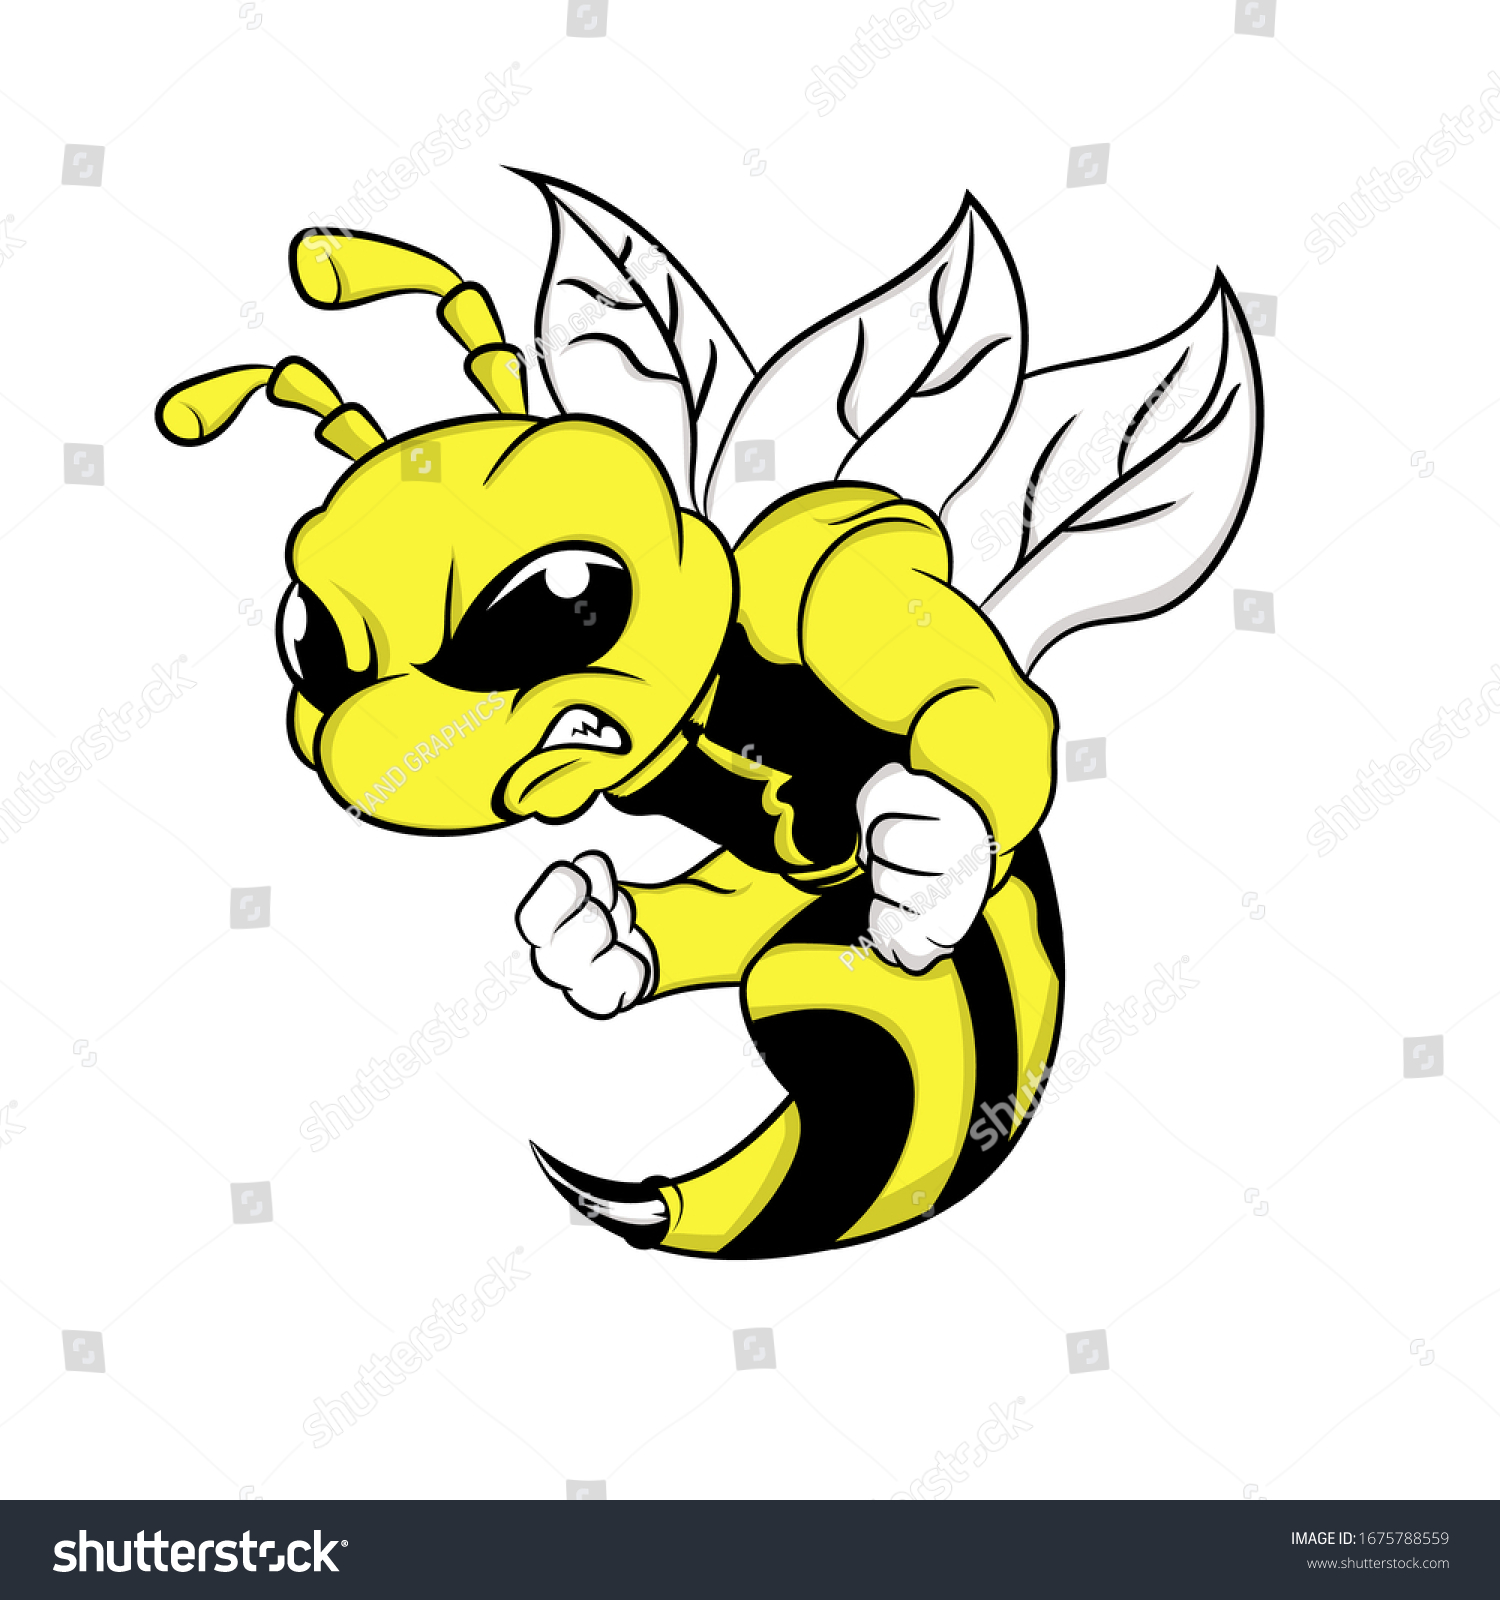 SVG of Illustration vector graphic of Hornet showing angry face, suitable for manufacturing T-Shirt, Sticker, Drawing Book, etc. svg